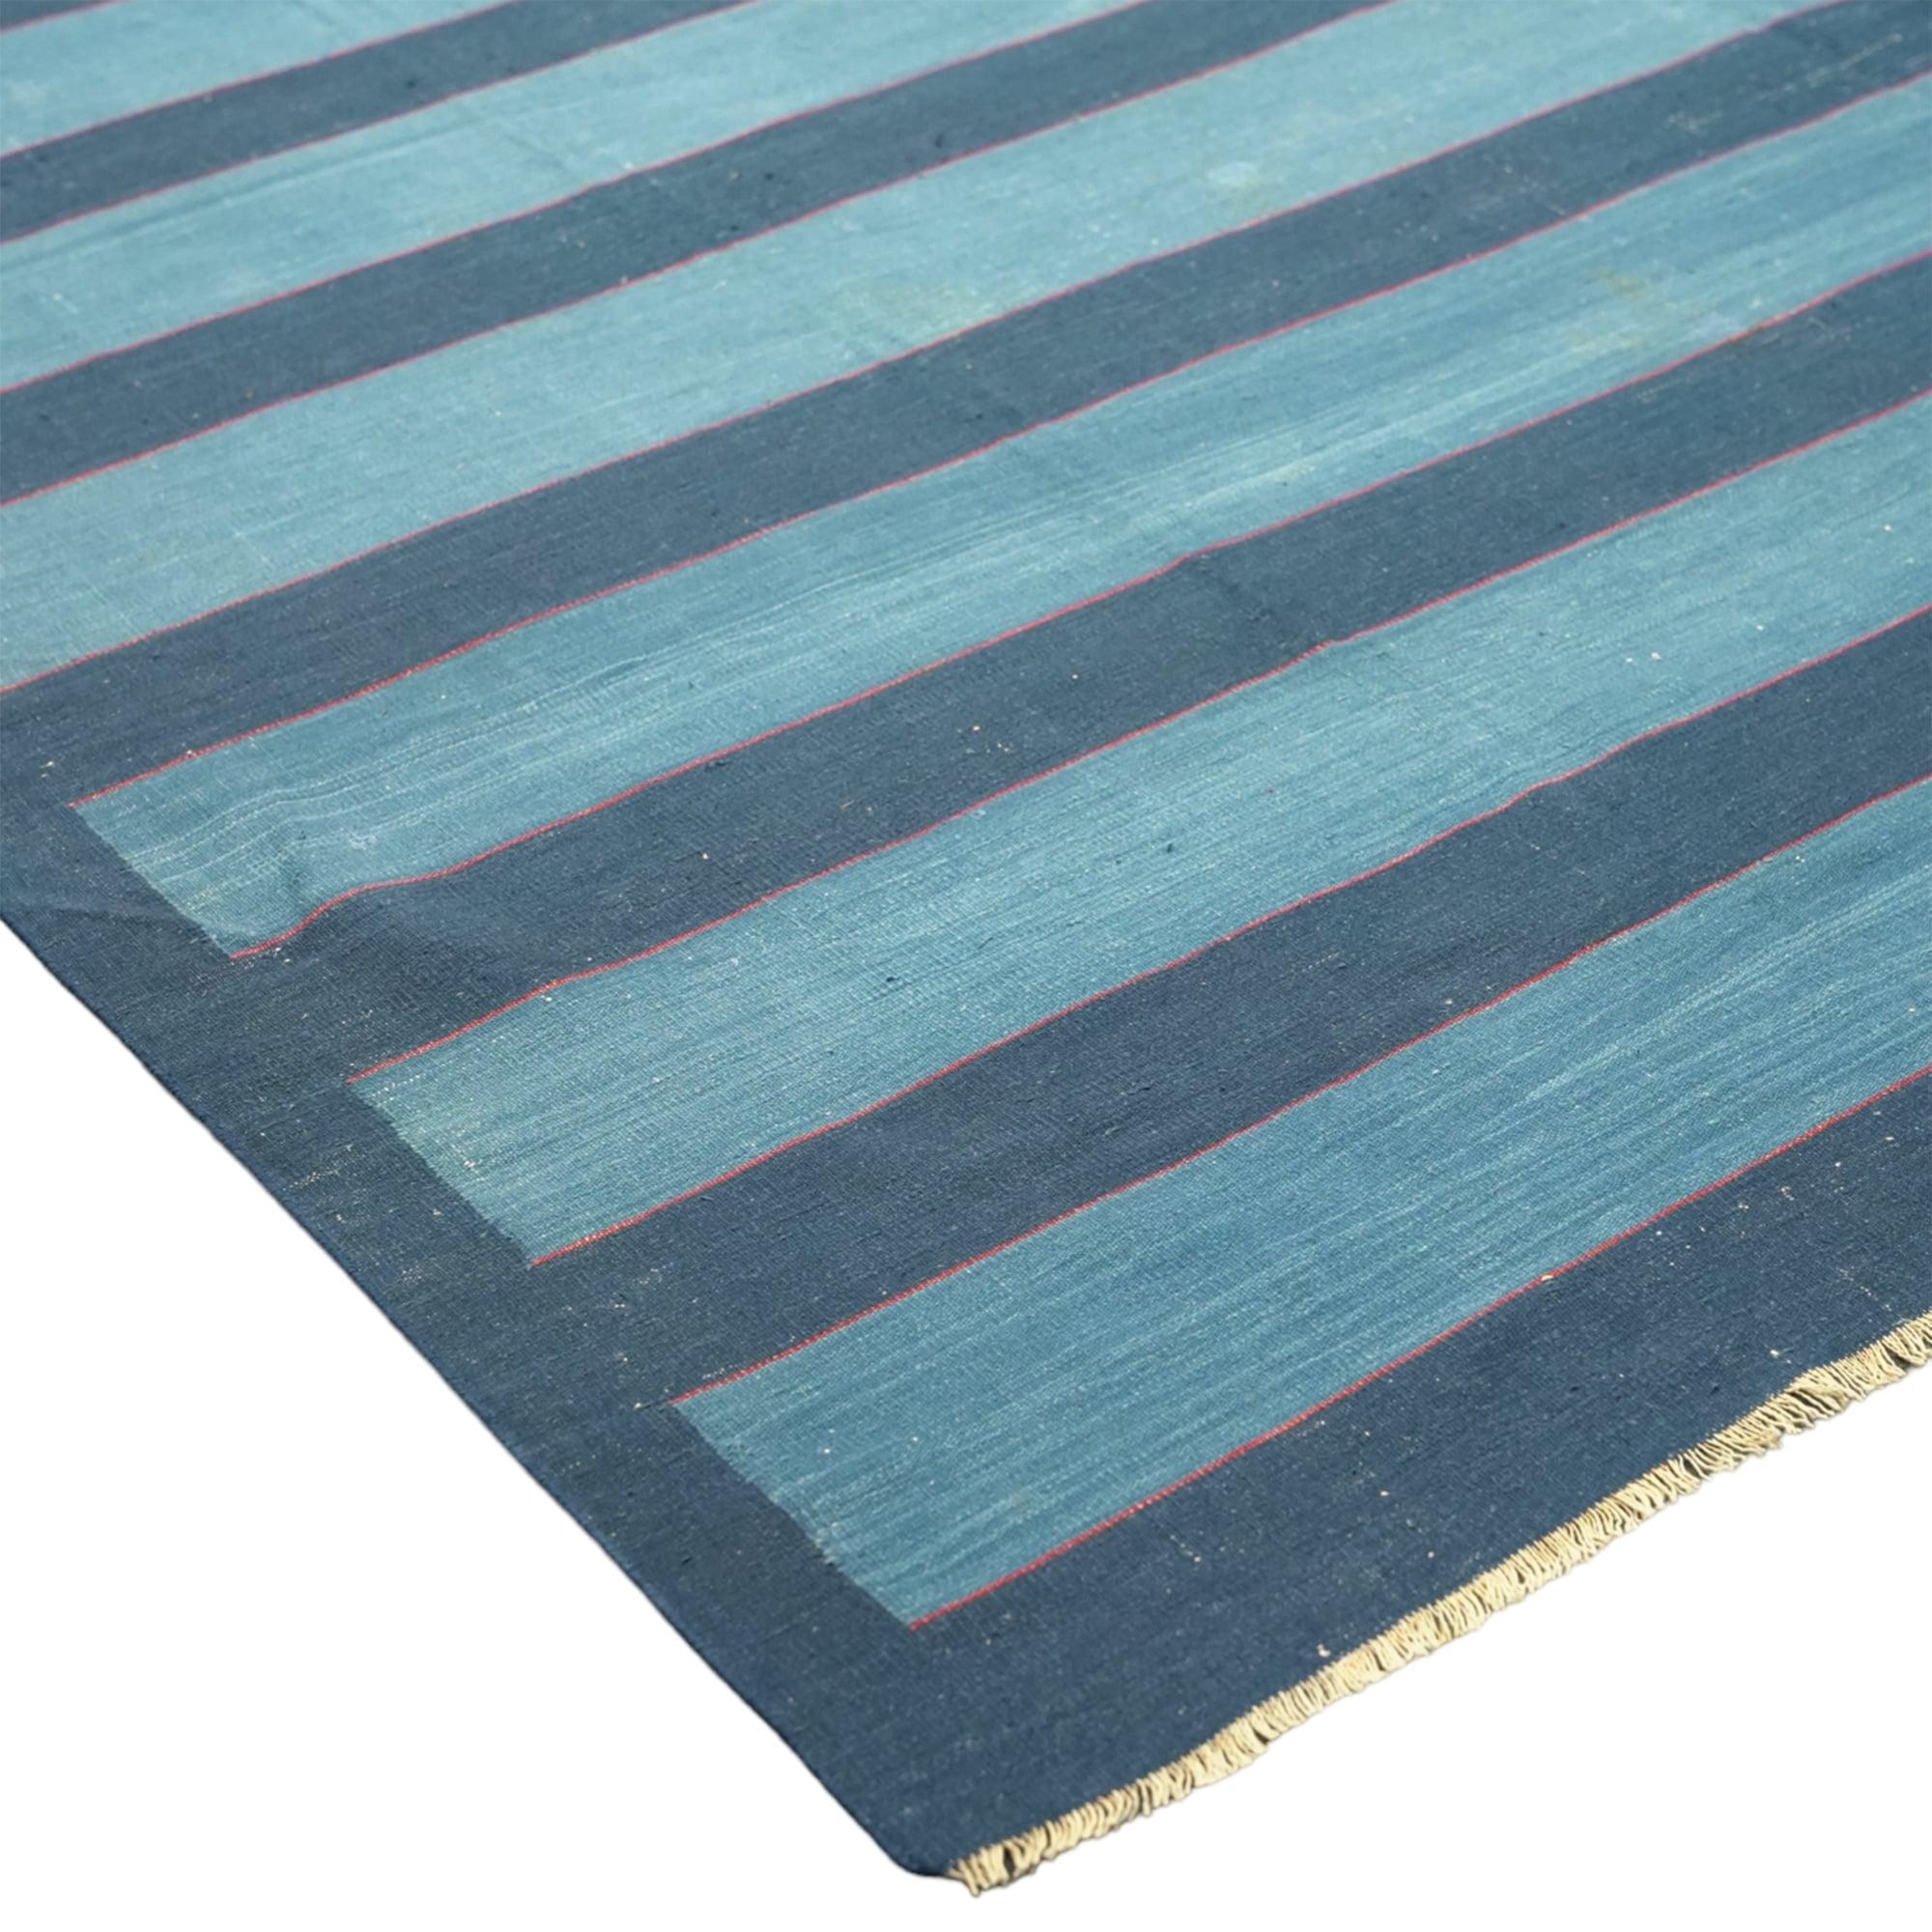 Indian Vintage Dhurrie Rug, with Blue Stripes, from Rug & Kilim For Sale